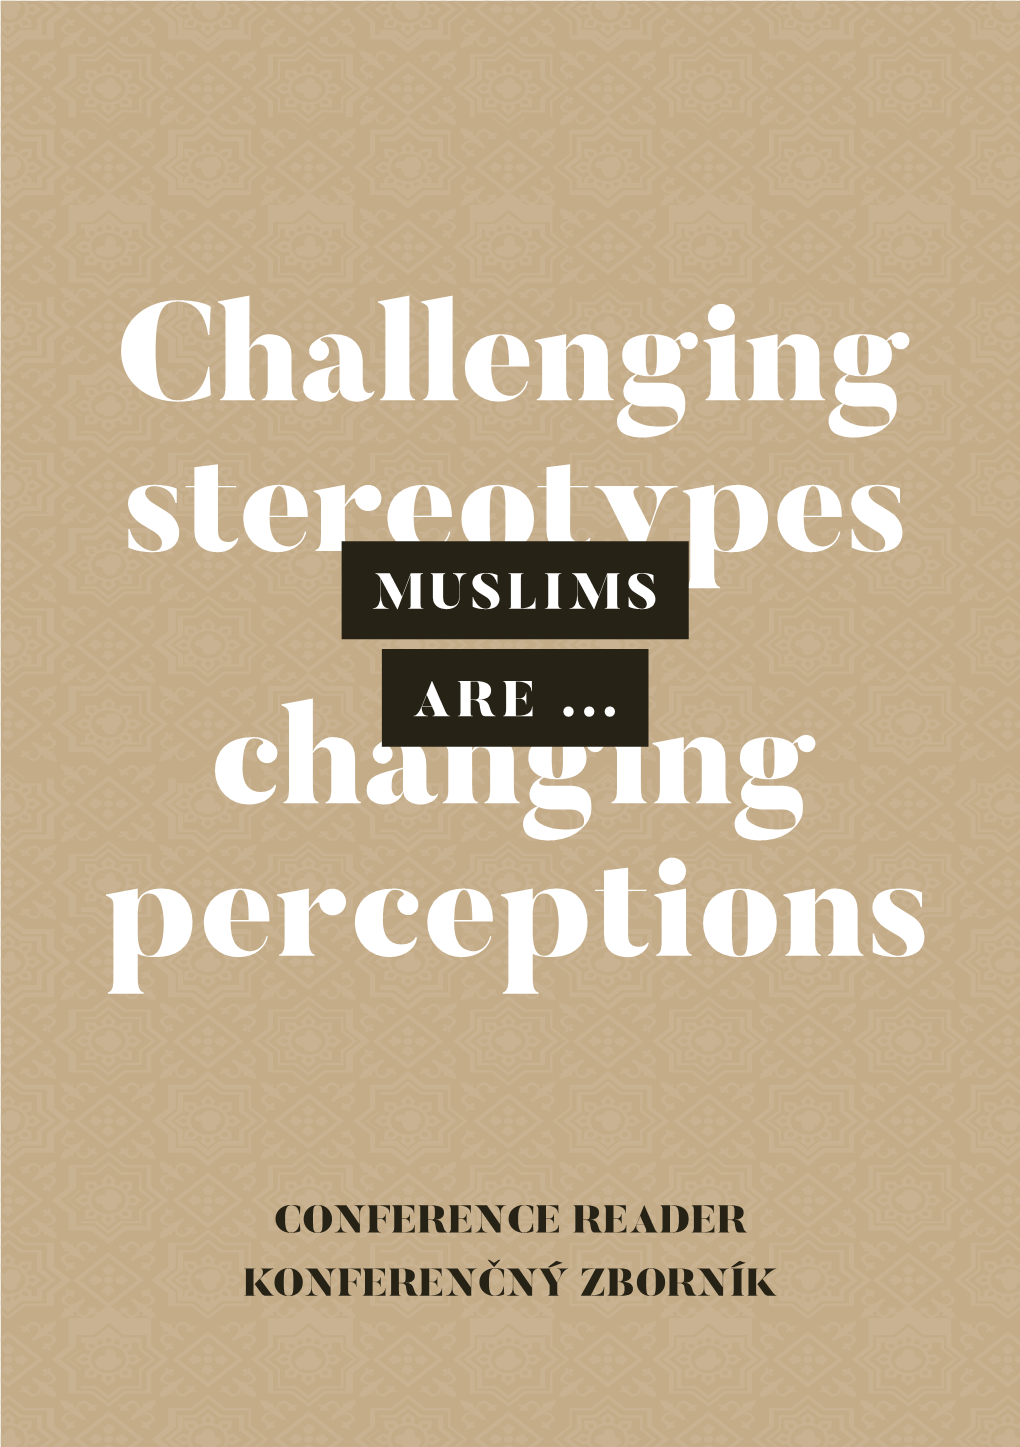 Muslims Are : Challenging Stereotypes, Changing Perceptions